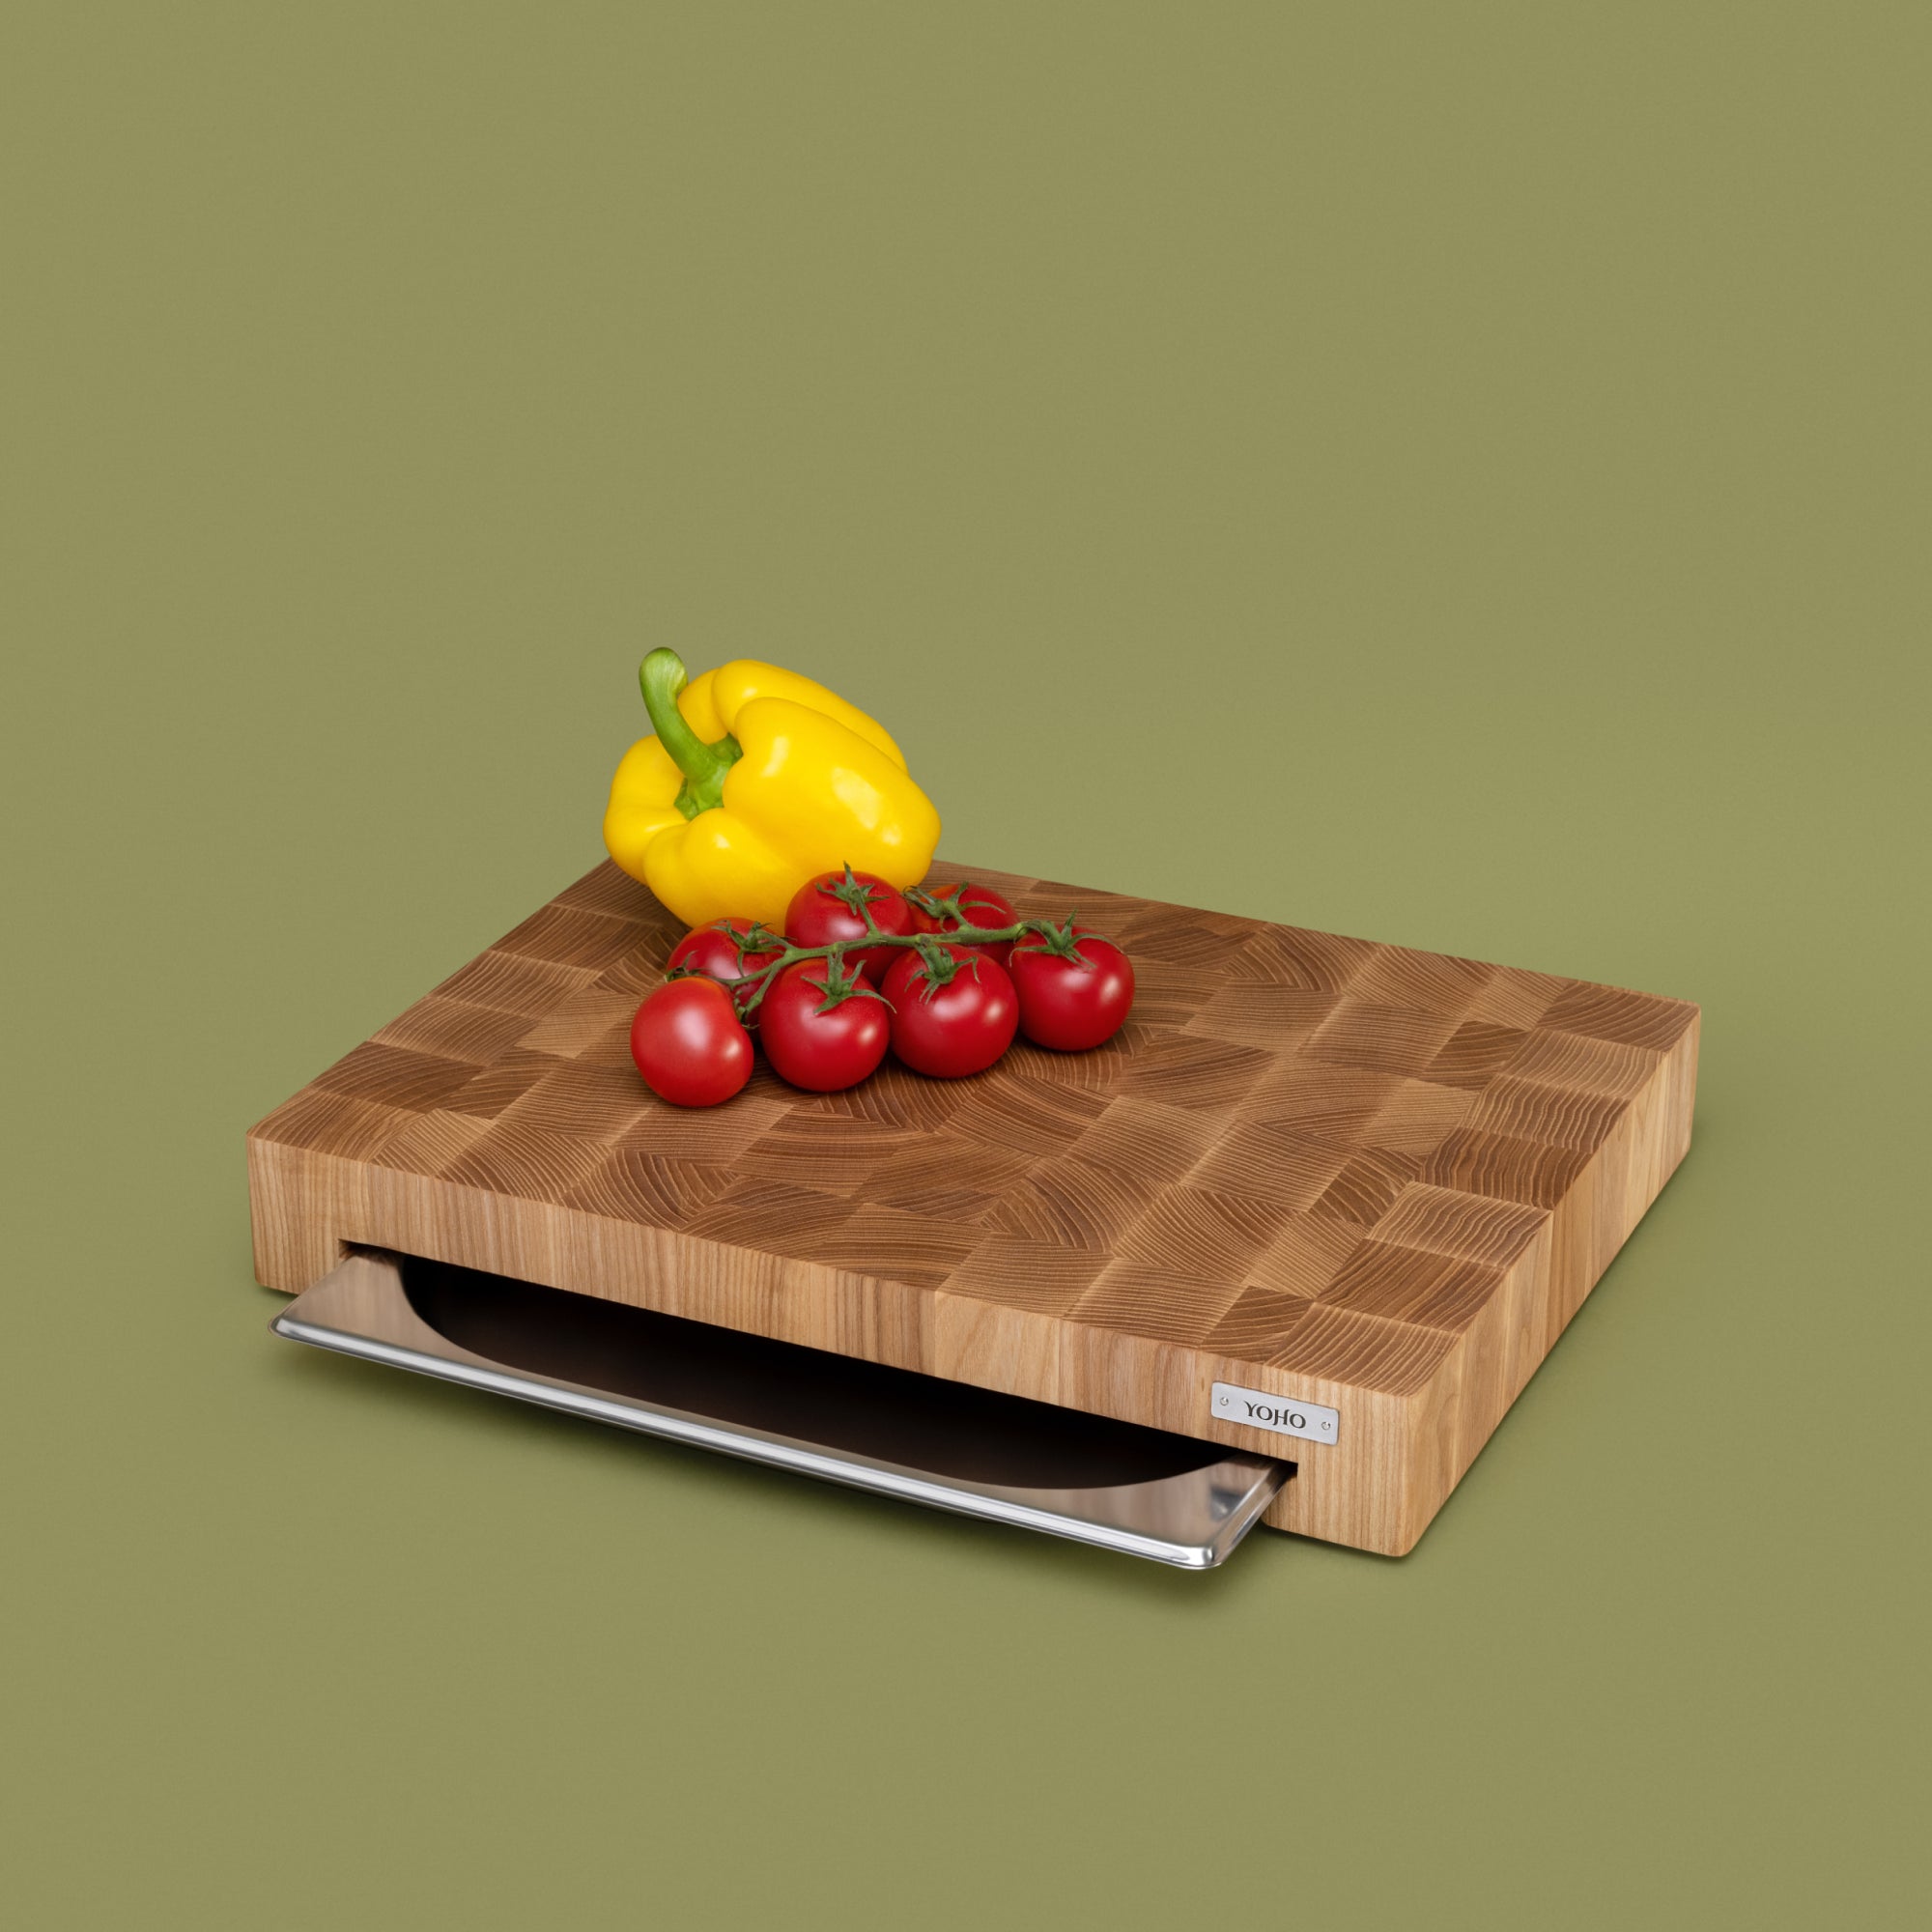 Ash Cutting Board With Tray Small 12x16